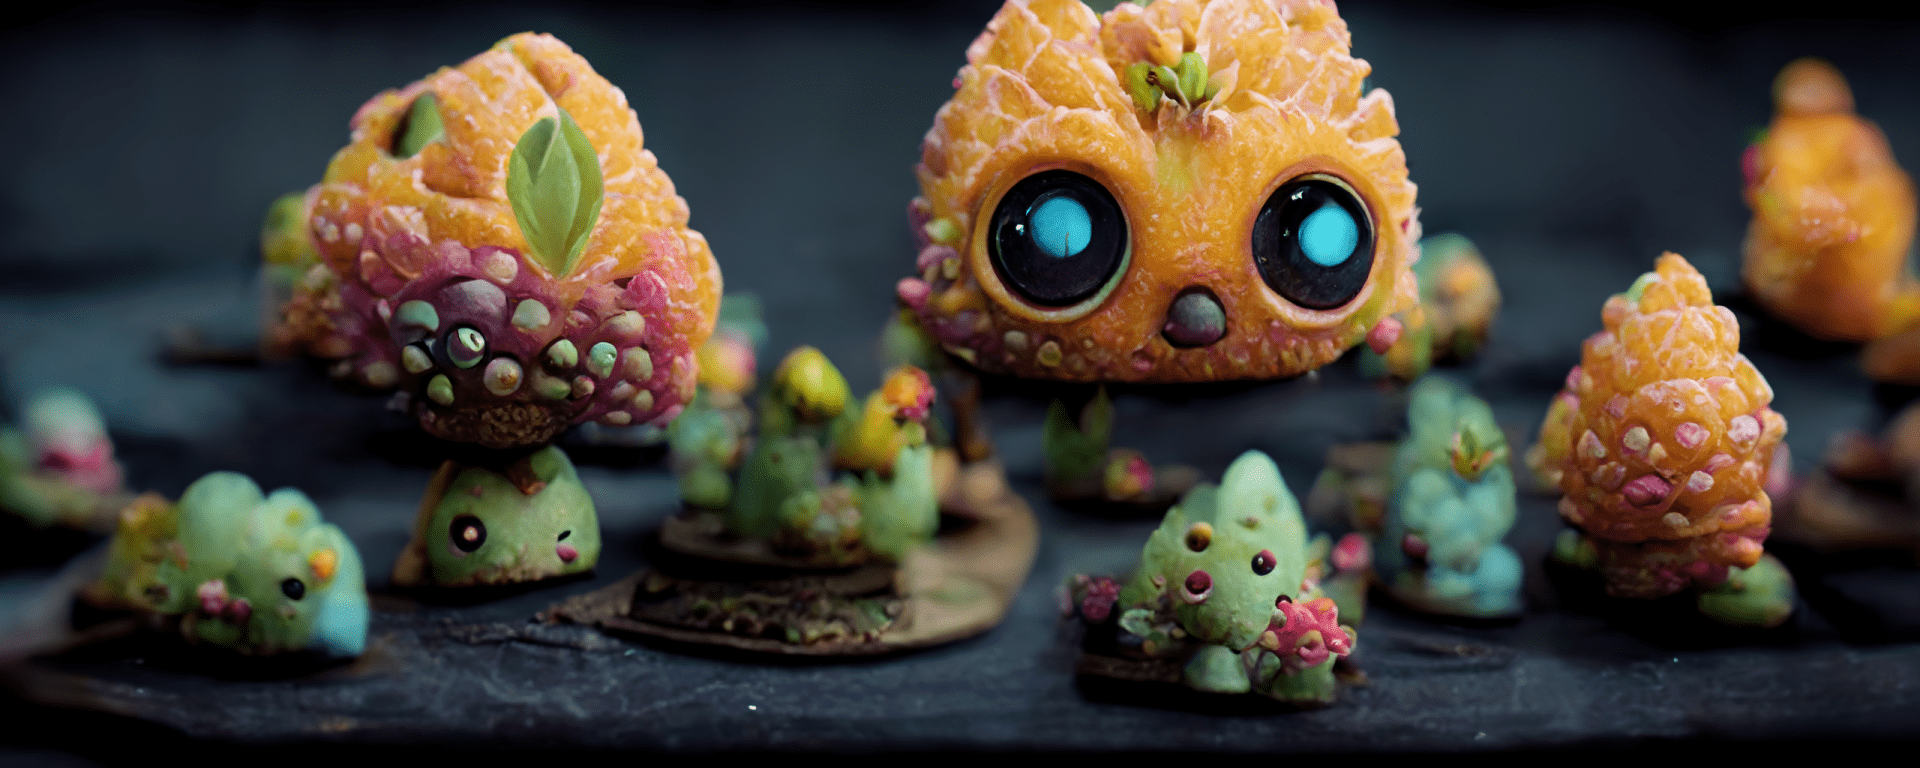 Remizca_army_of_cute_fruit_ghosts_adorable_black_solid_eyes_int_68e6100d-a4ea-412b-b261-fc1359...png